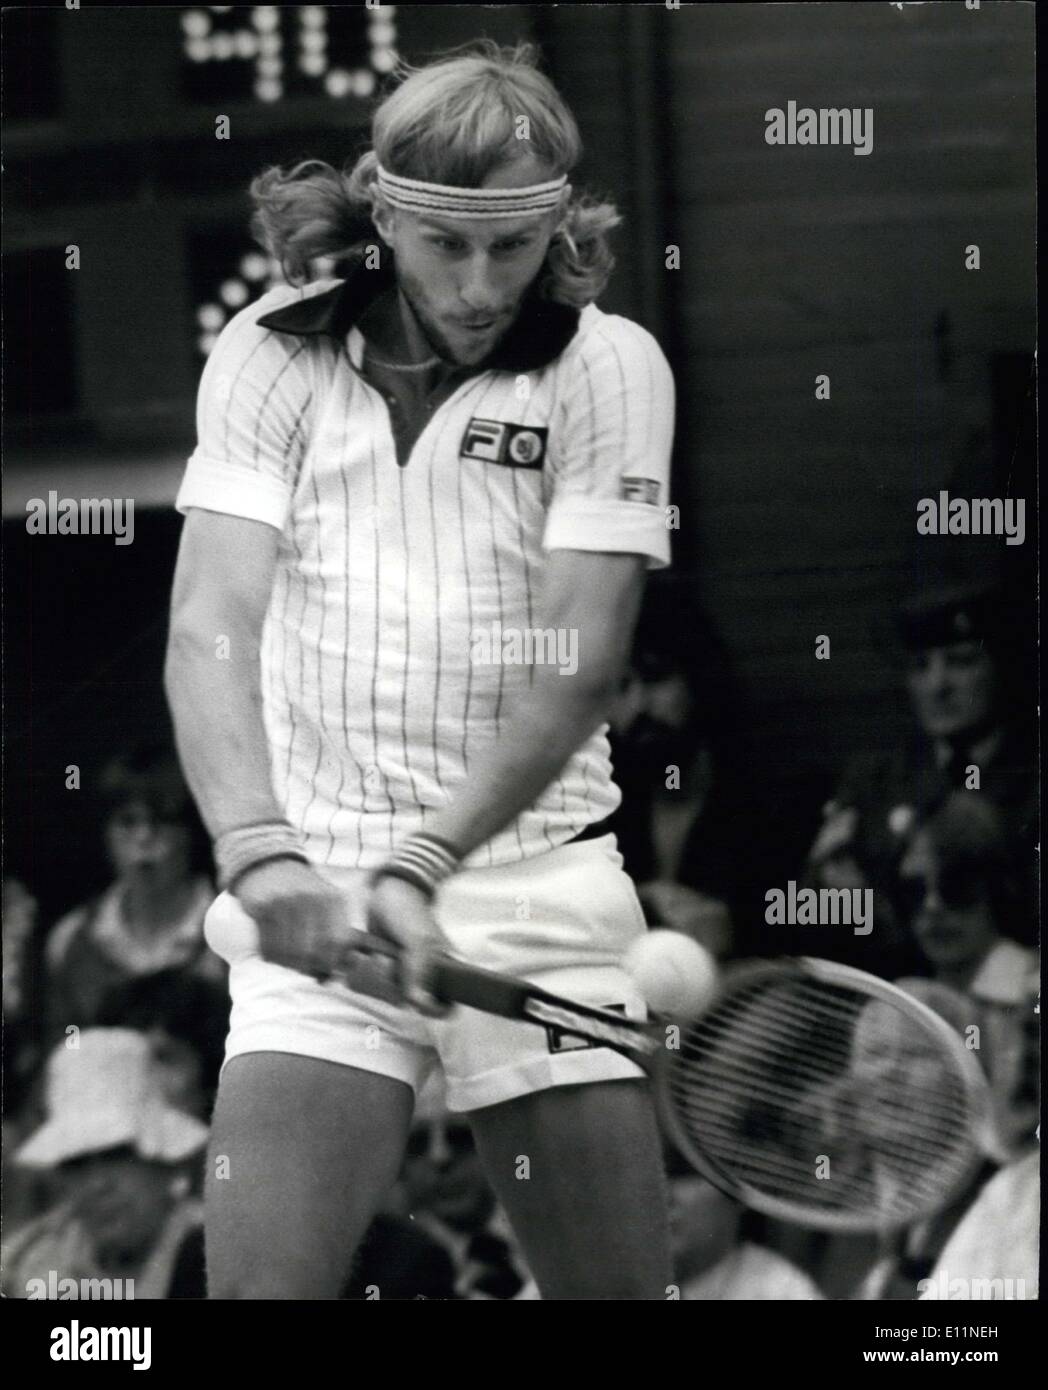 Jul. 07, 1979 - Bjorn Borg win Wimbledon for he fourth time in a row: Today on the Centre Court at Wimbledon, Bjron Borg of Sweden won the Men's Singles title for the fourth successive time when beating the American Rosco~ Tanner in five sets. Photo shows Bjorn Borg seen in action against Rosco~ Tanner on the centre court. Stock Photo